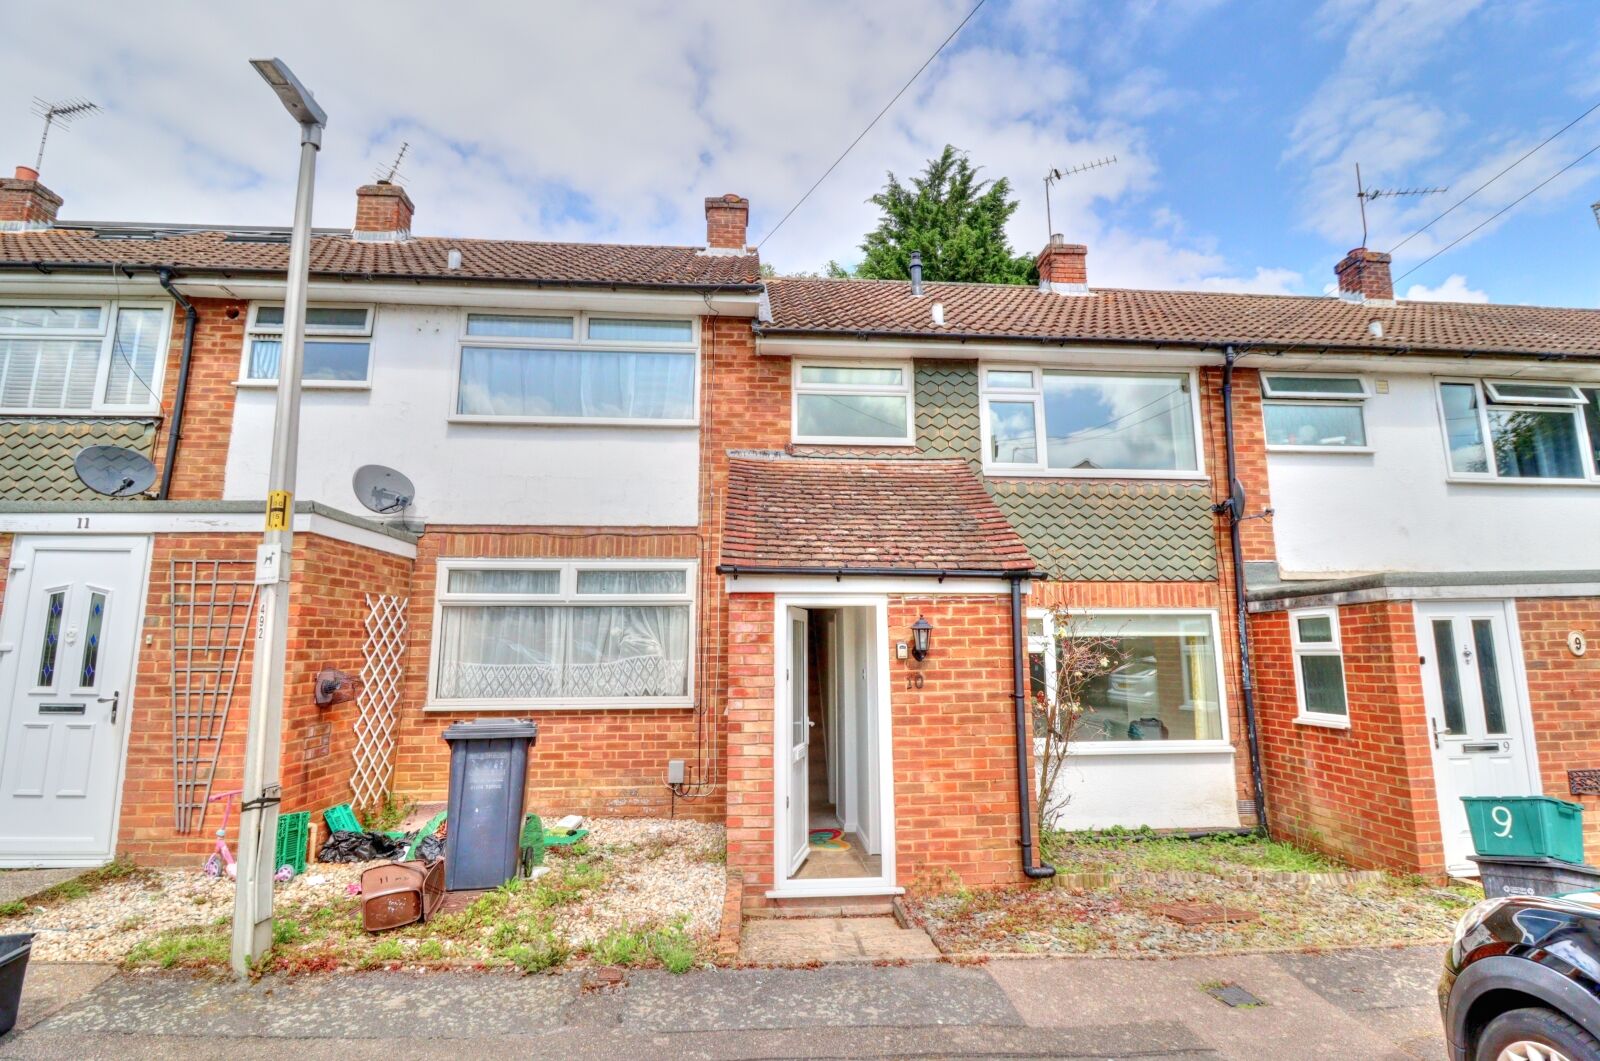 3 bedroom mid terraced house to rent, Available now Meadow Drive, Amersham, HP6, main image